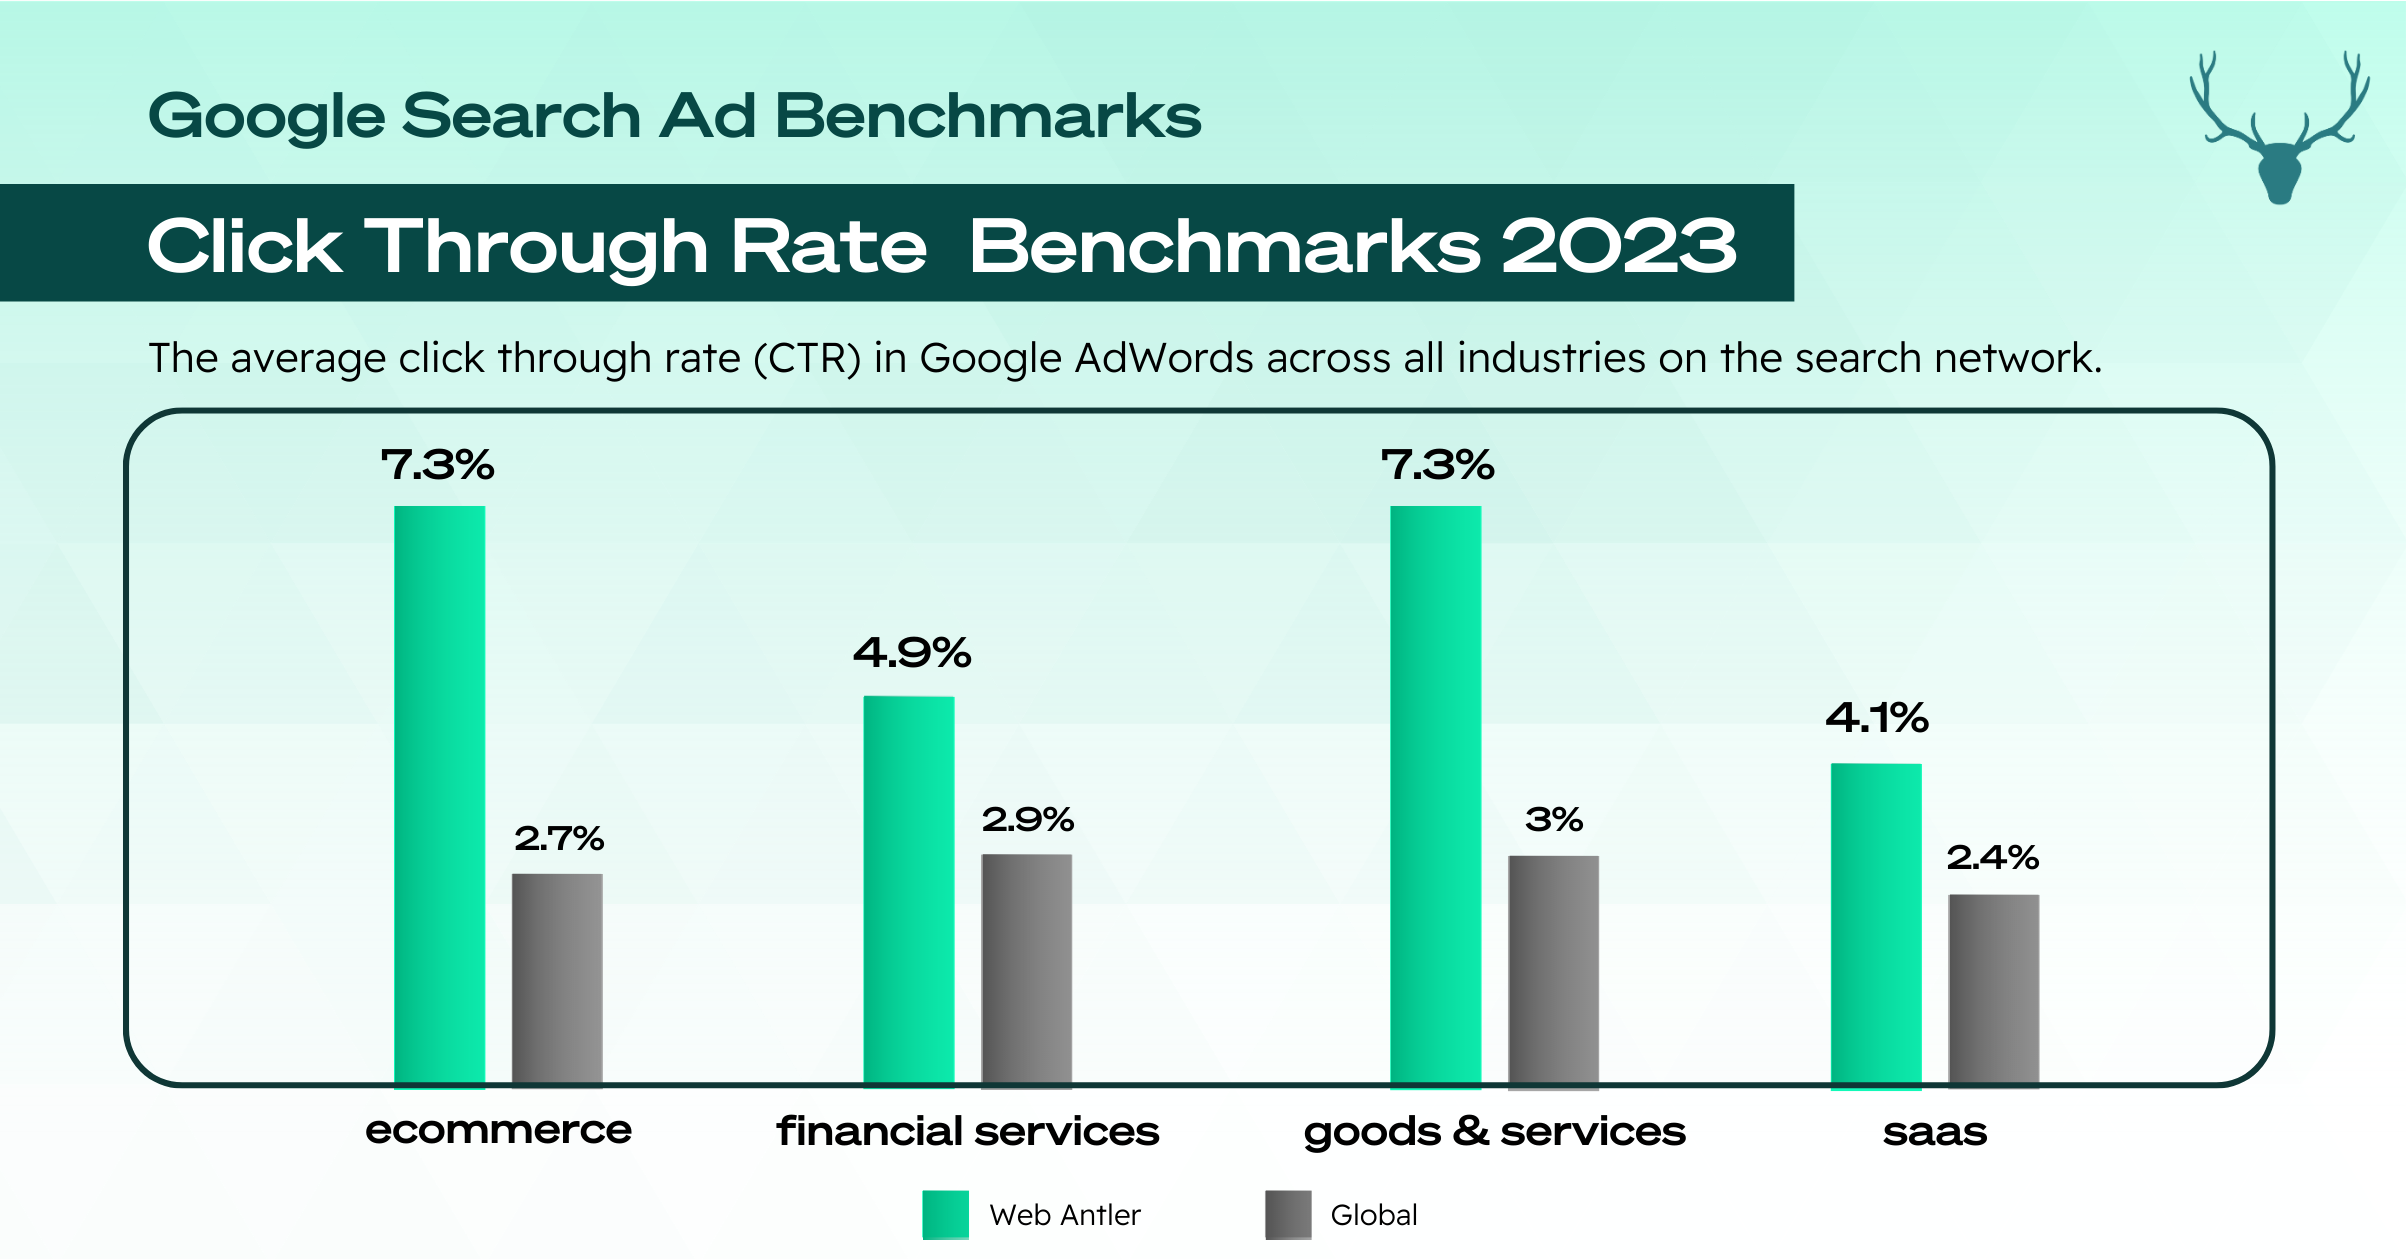 Google Search Ad Benchmarks Click Through Rate 2023 NZ